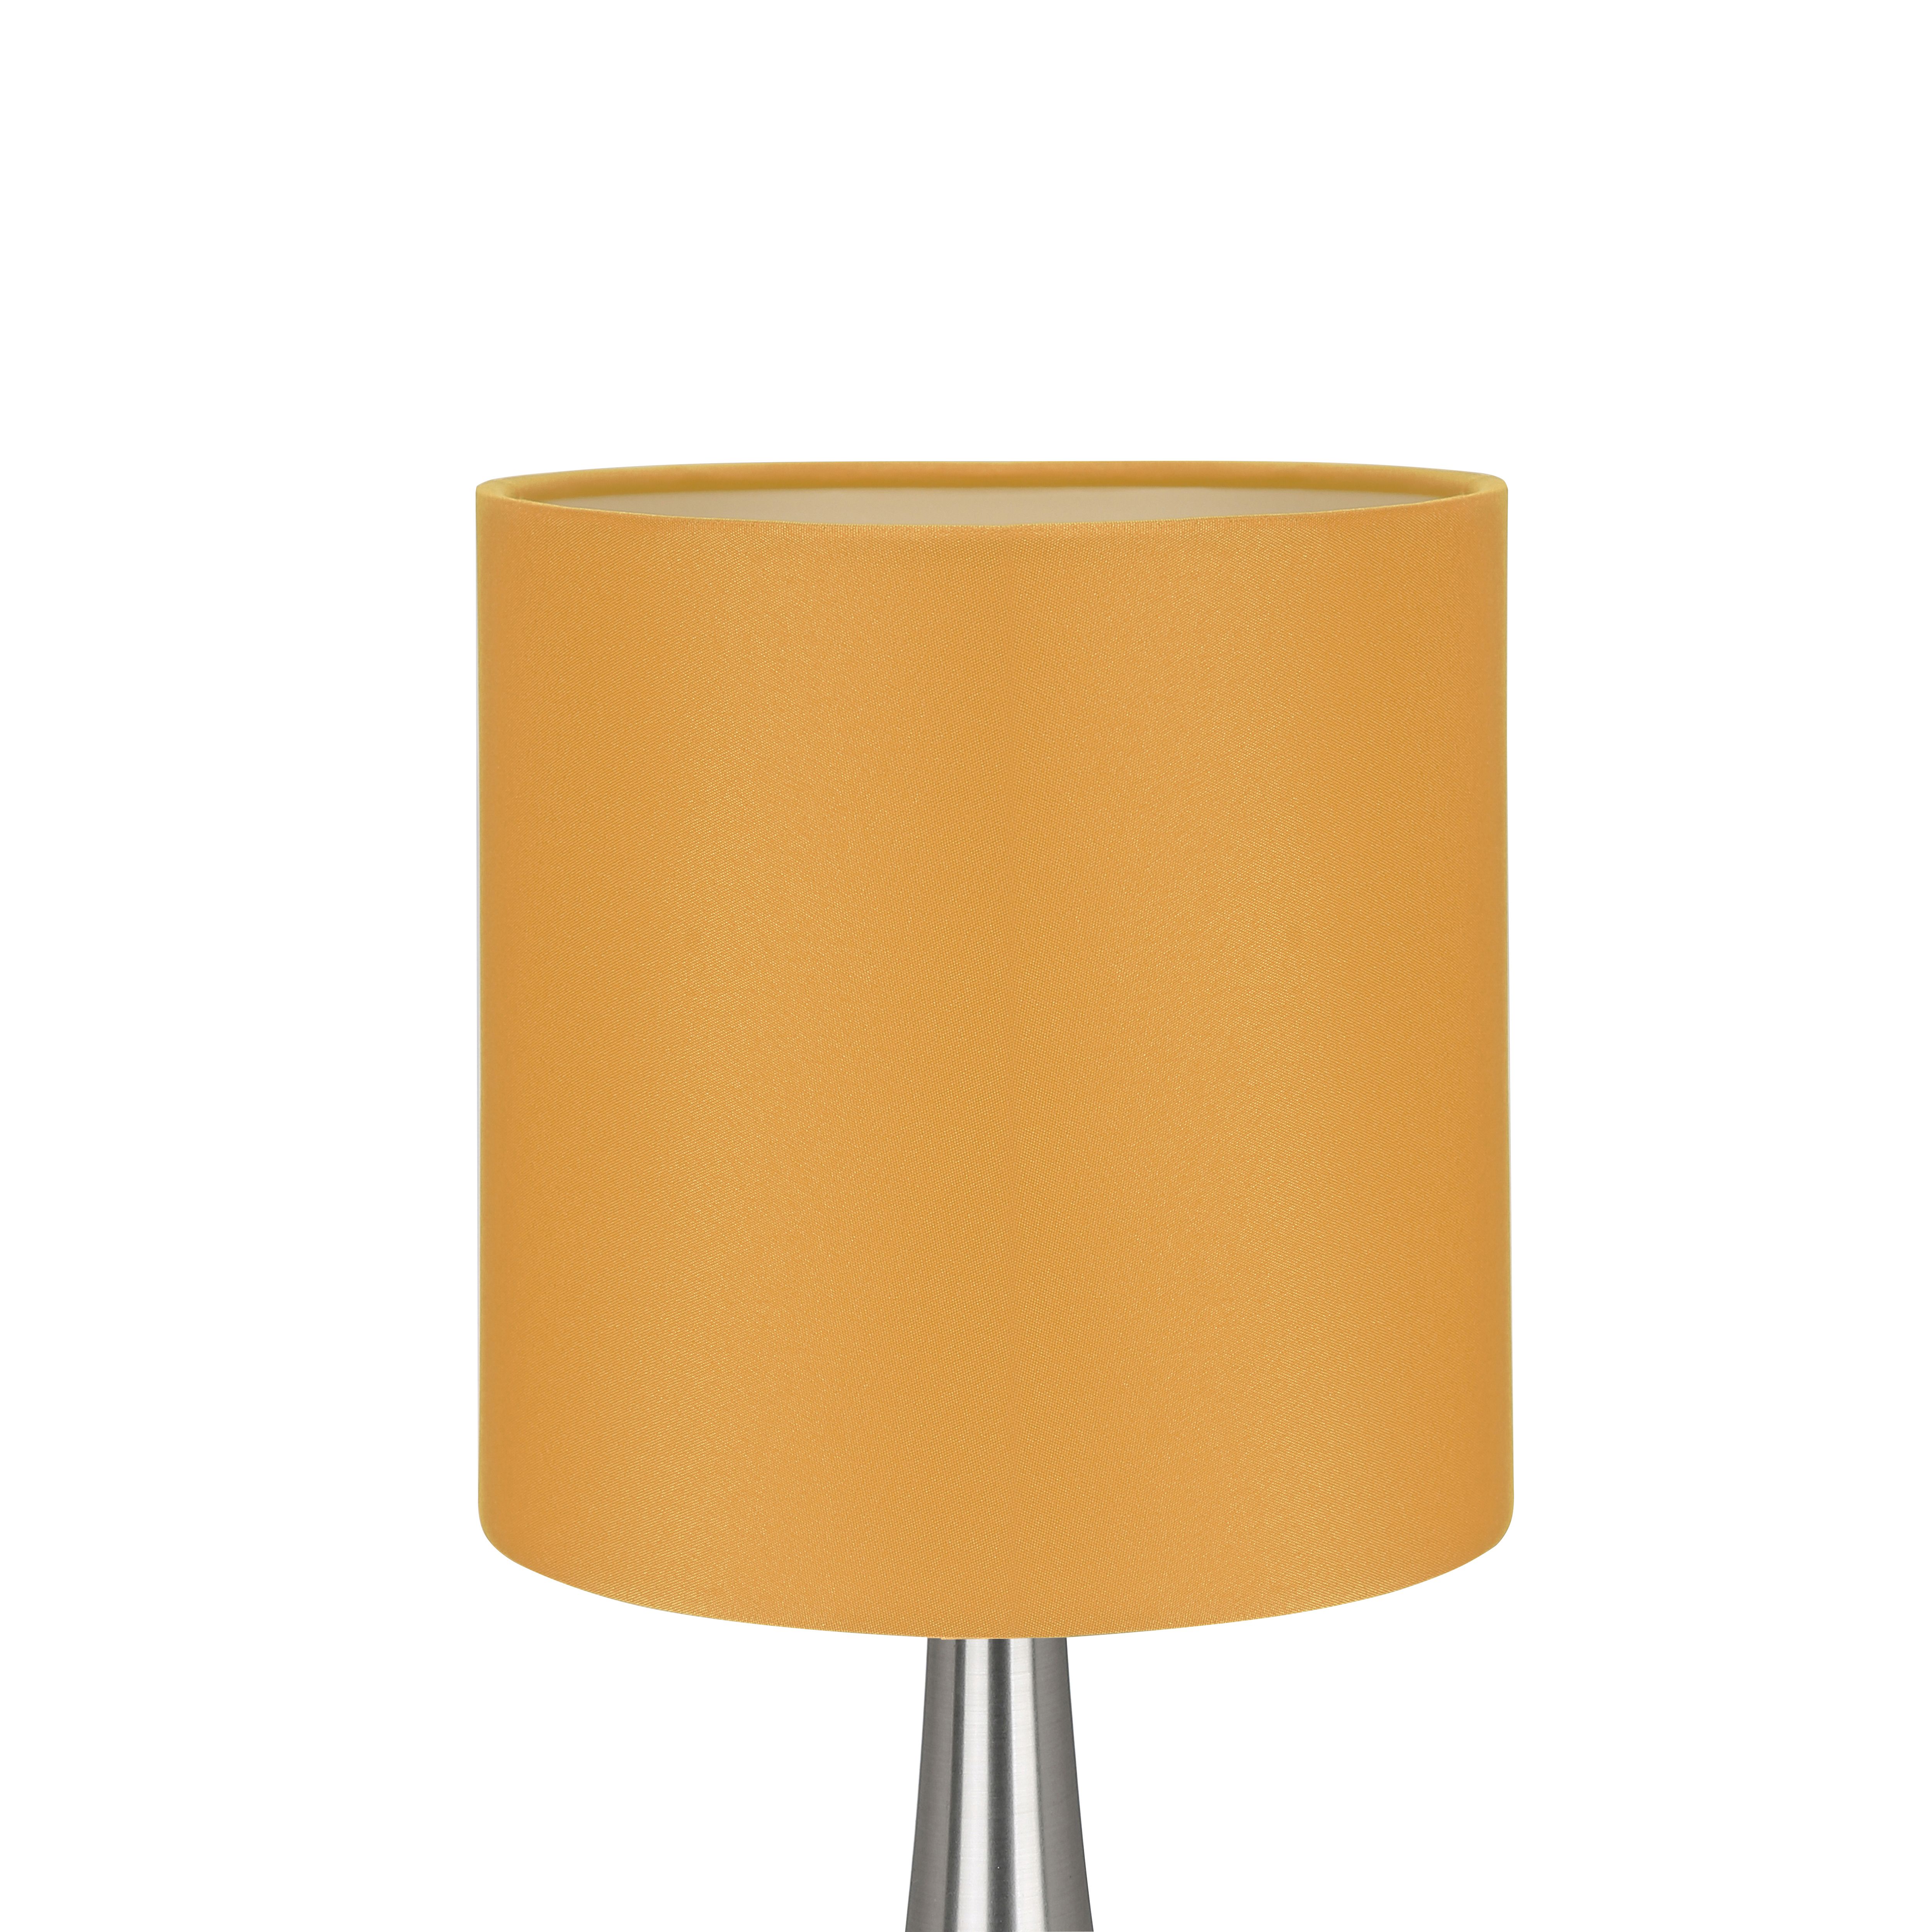 GoodHome Painswick Satin Yellow Nickel effect Cylinder Table lamp